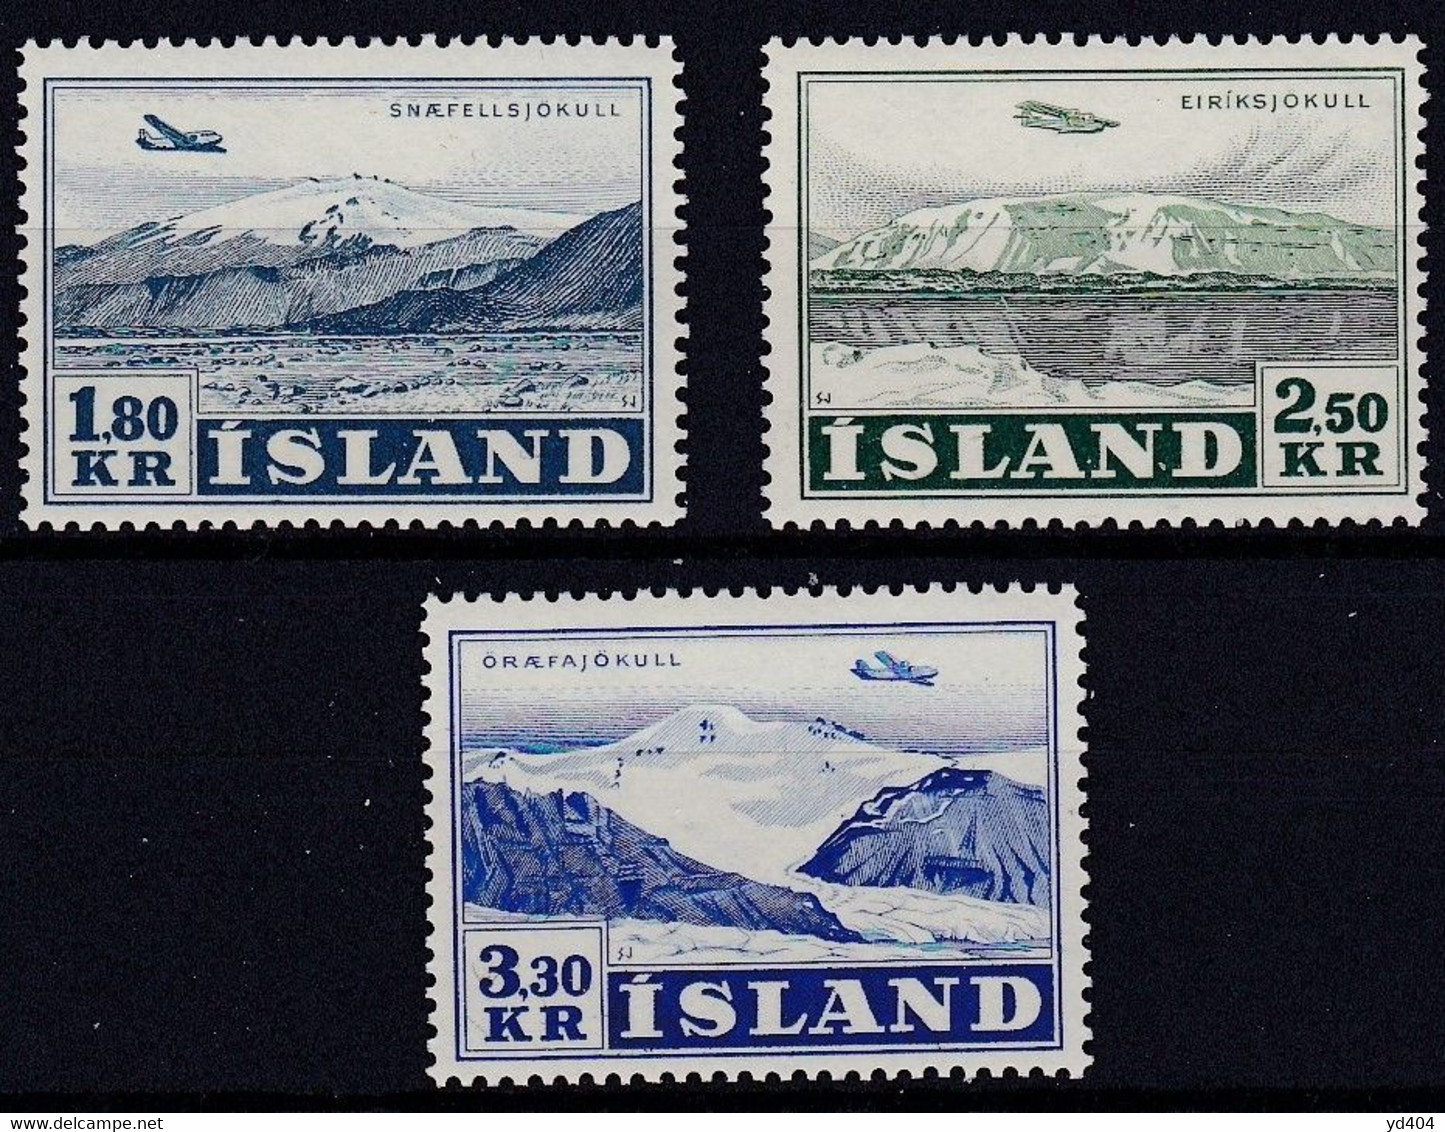 IS380 – ISLANDE – ICELAND – AIRMAIL - 1952 – PLANES OVER GLACIERS – Y&T # 27/9 USED 65 € - Luchtpost